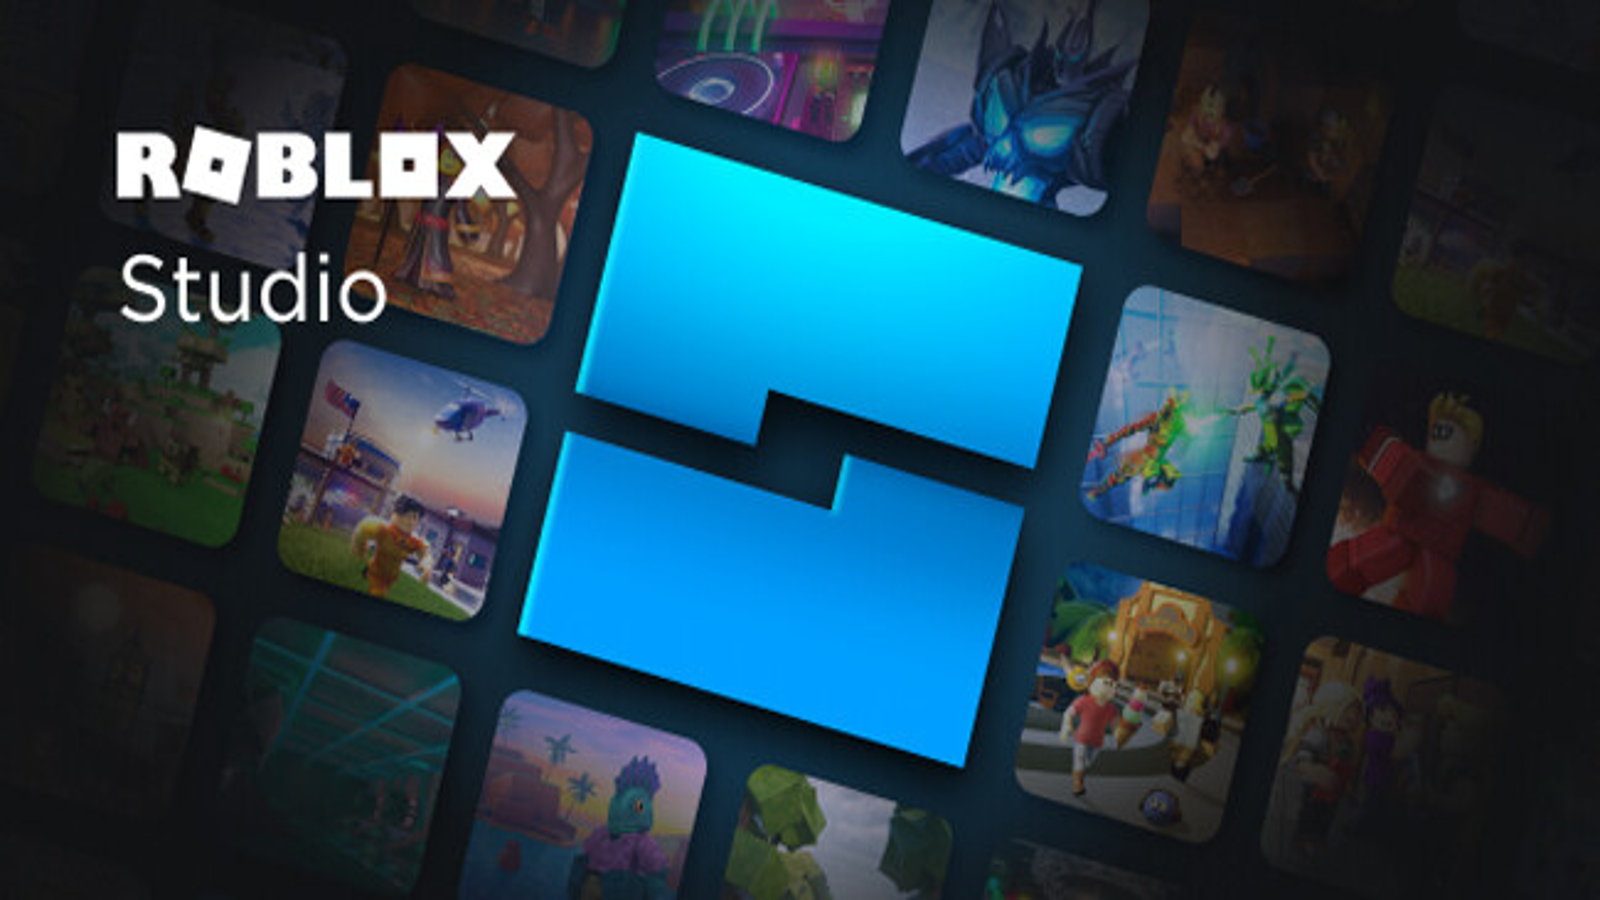 How to Get Started with Roblox Studio (Step-By-Step Guide for